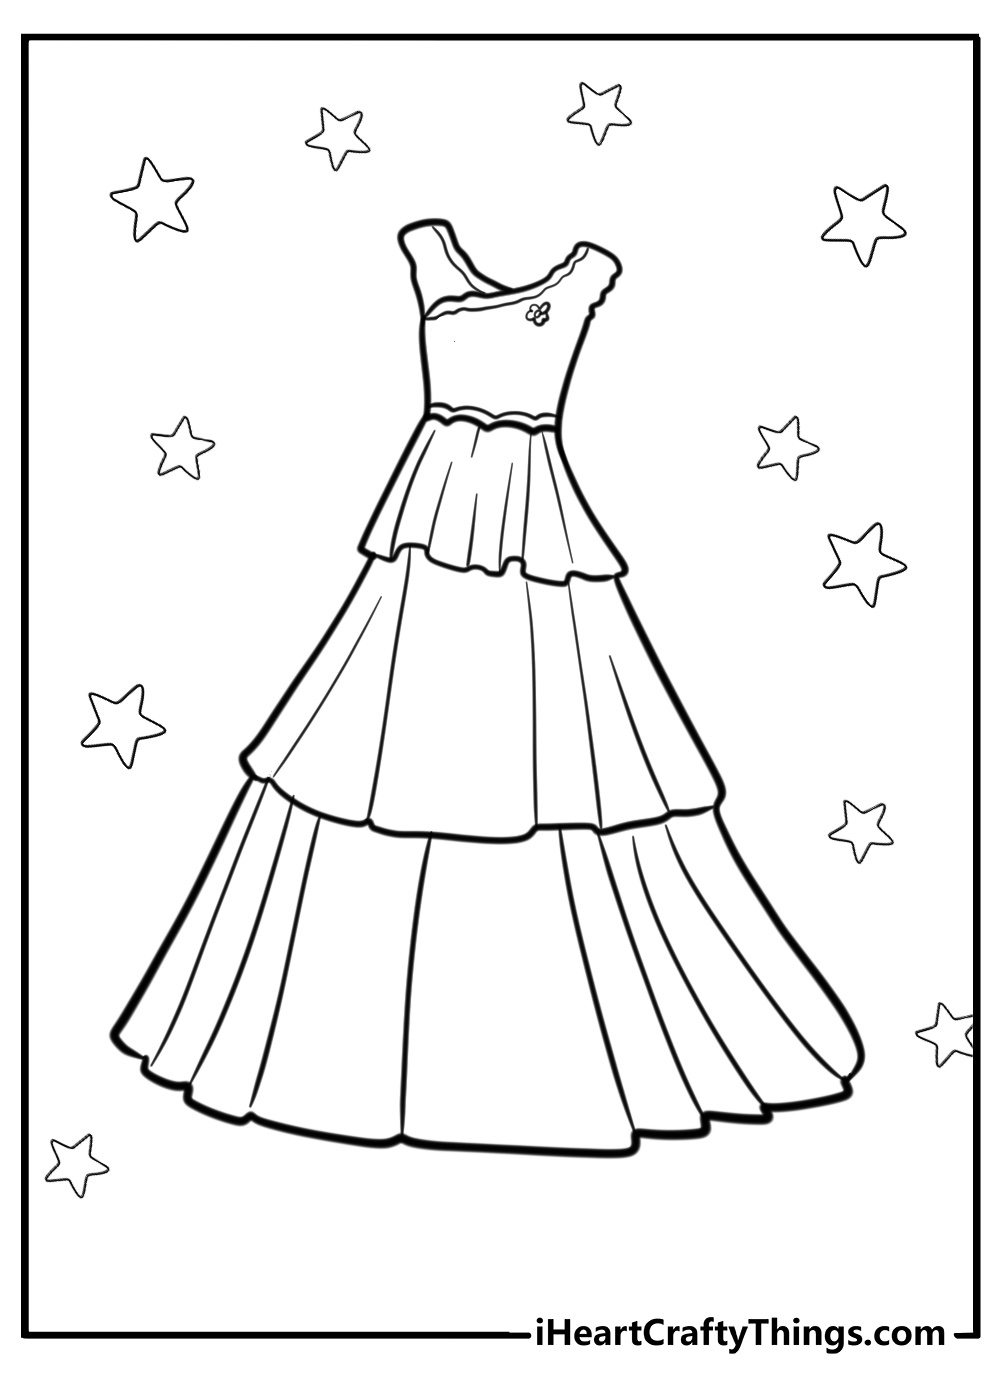 Wedding dress coloring page with short sleeves and tiered tulle tail